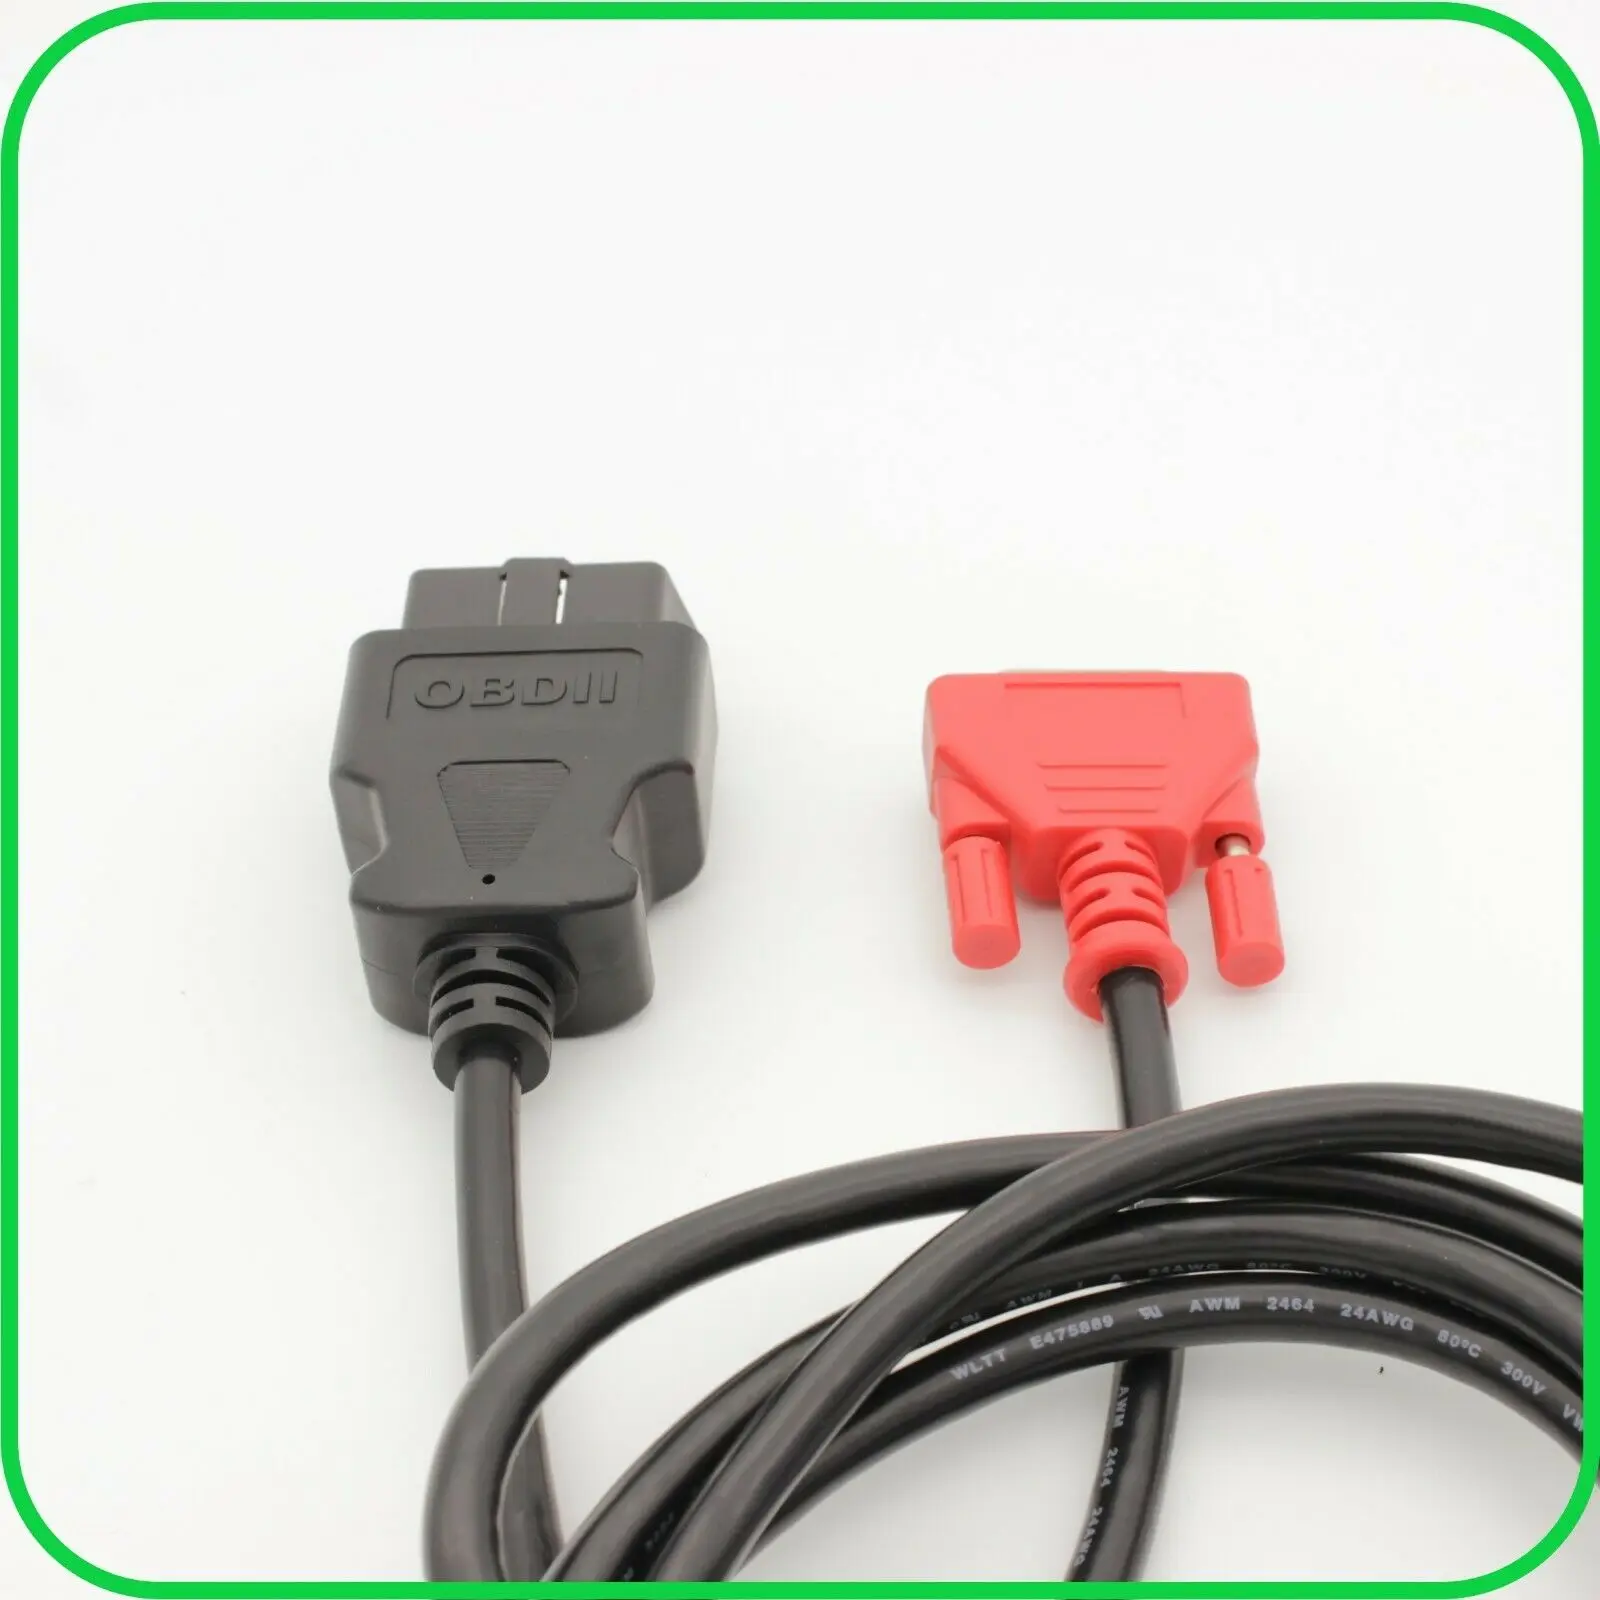 Compatible DA-4 OBDII OBD2 Data Cable For Snap On Scanner VERUS WIRELESS EEMS325 